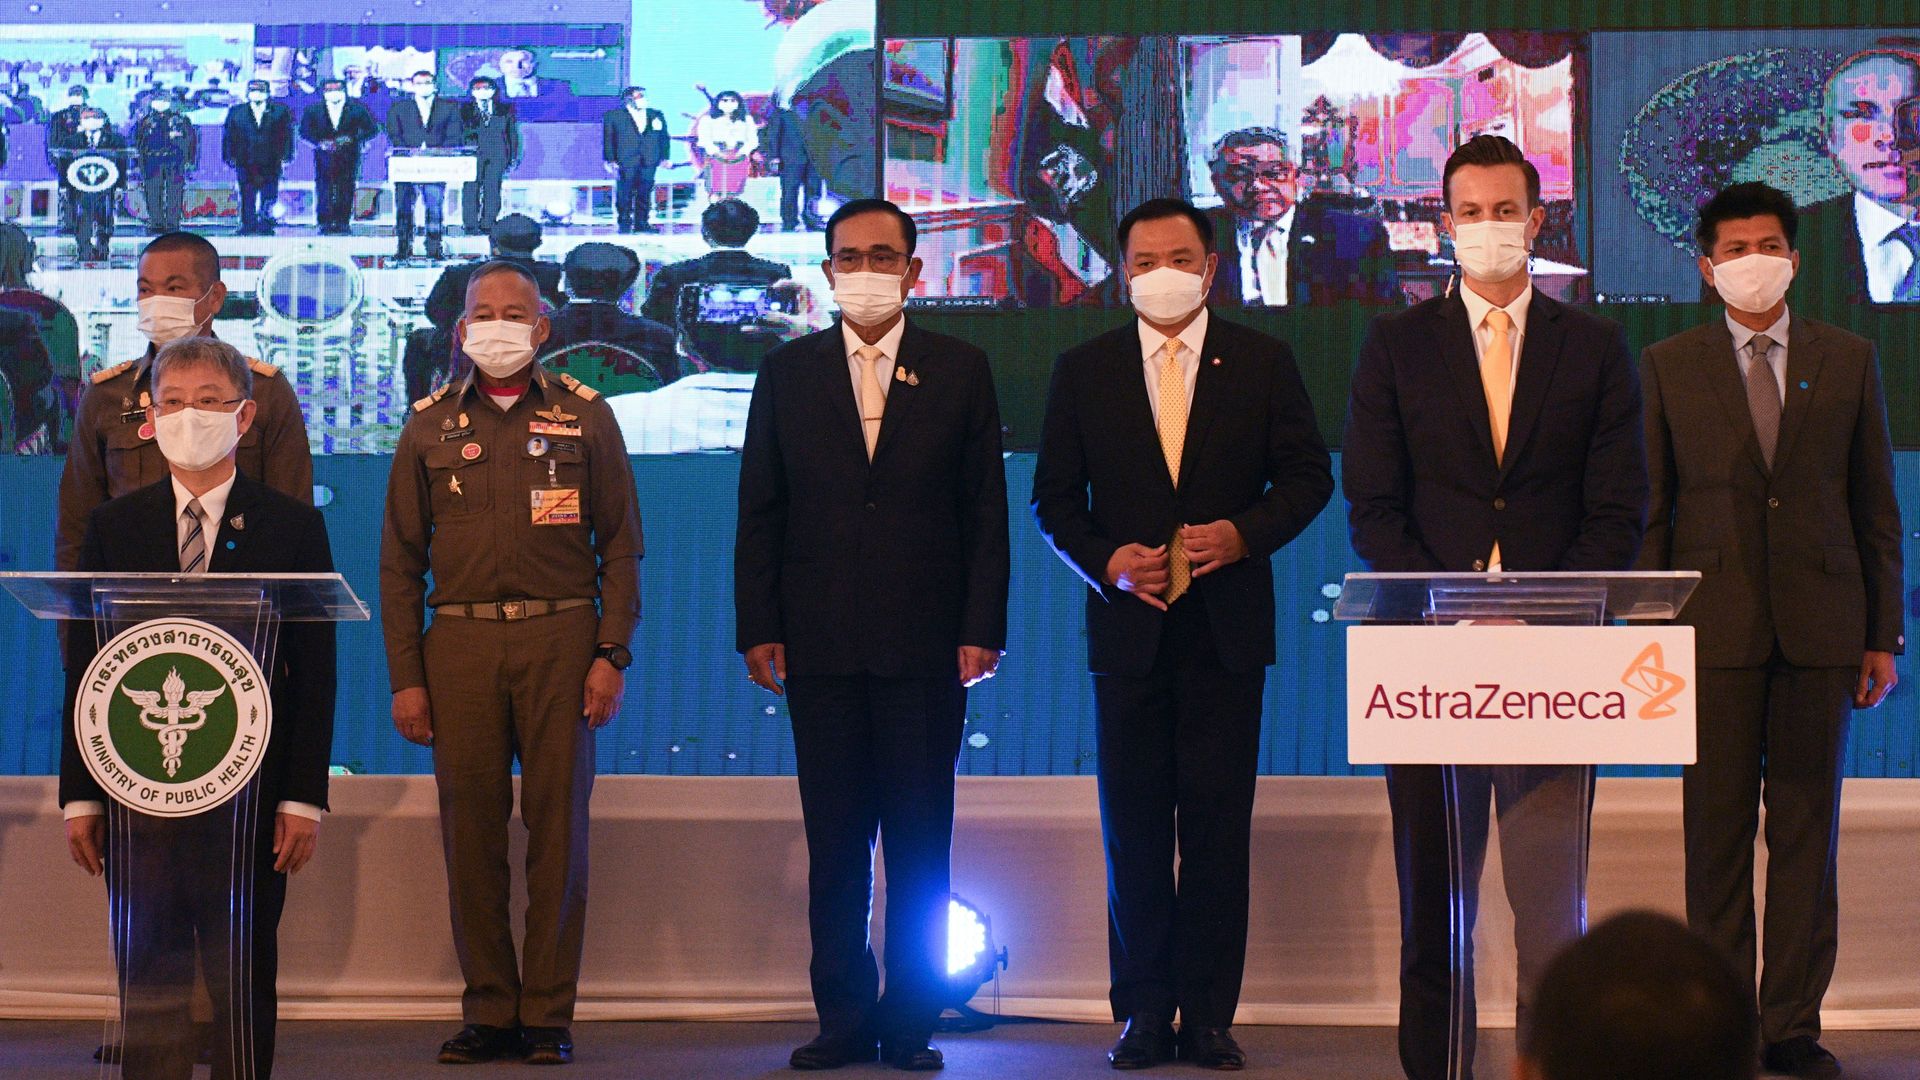 Picture of Thailand government officials in a ceremony with Thailand AstraZeneca president for the agreement to purchase AstraZeneca's potential Covid-19 vaccine